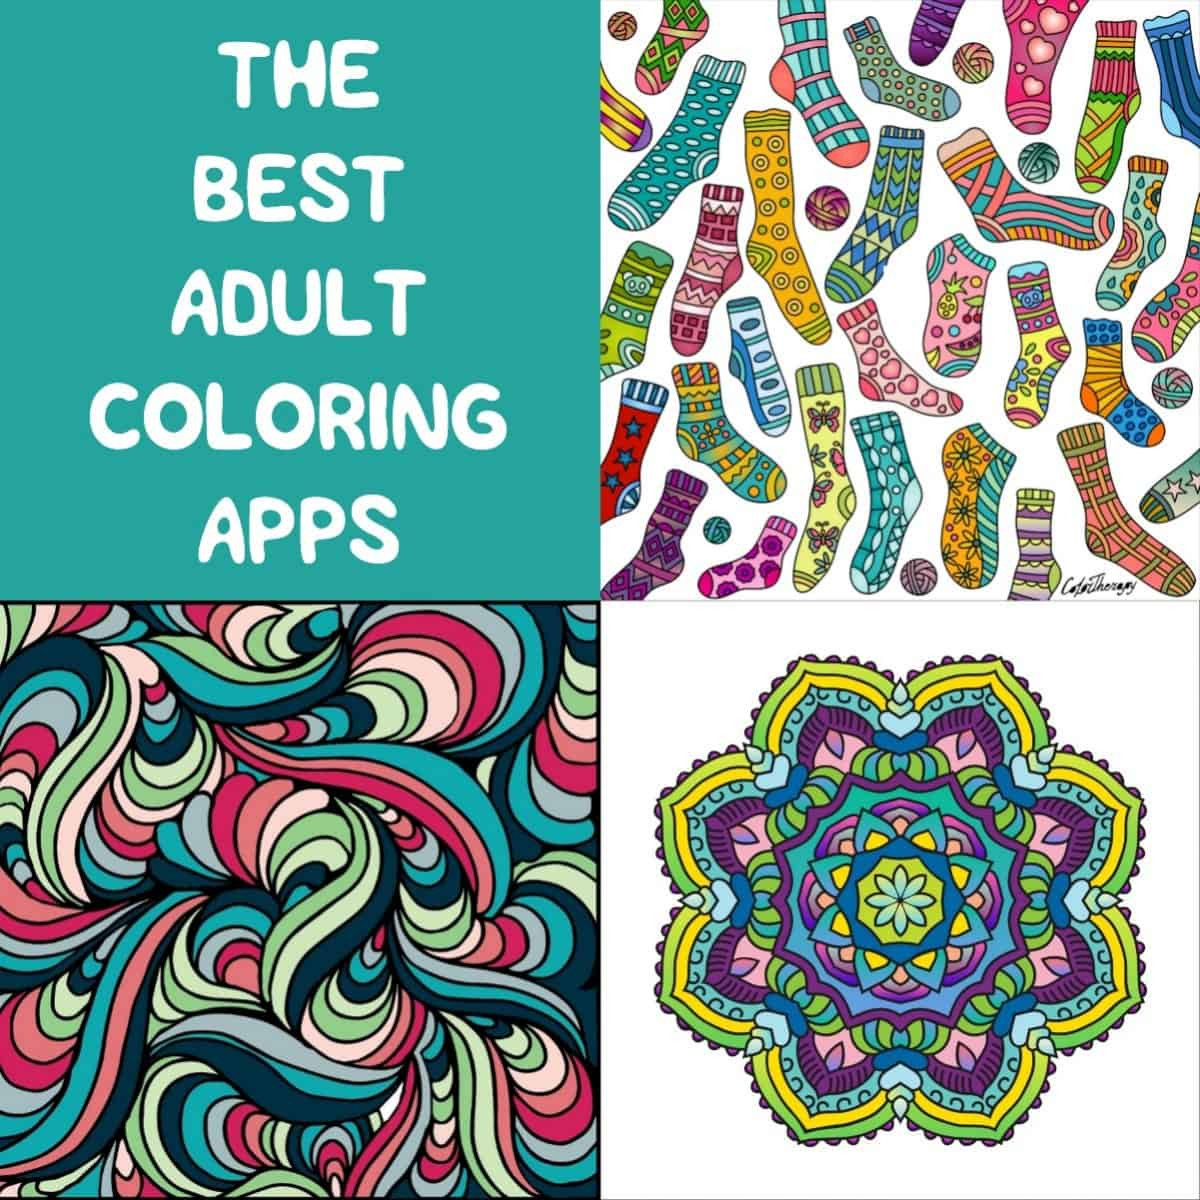 Coloring Book App For Adults
 The Best Adult Coloring Apps diycandy